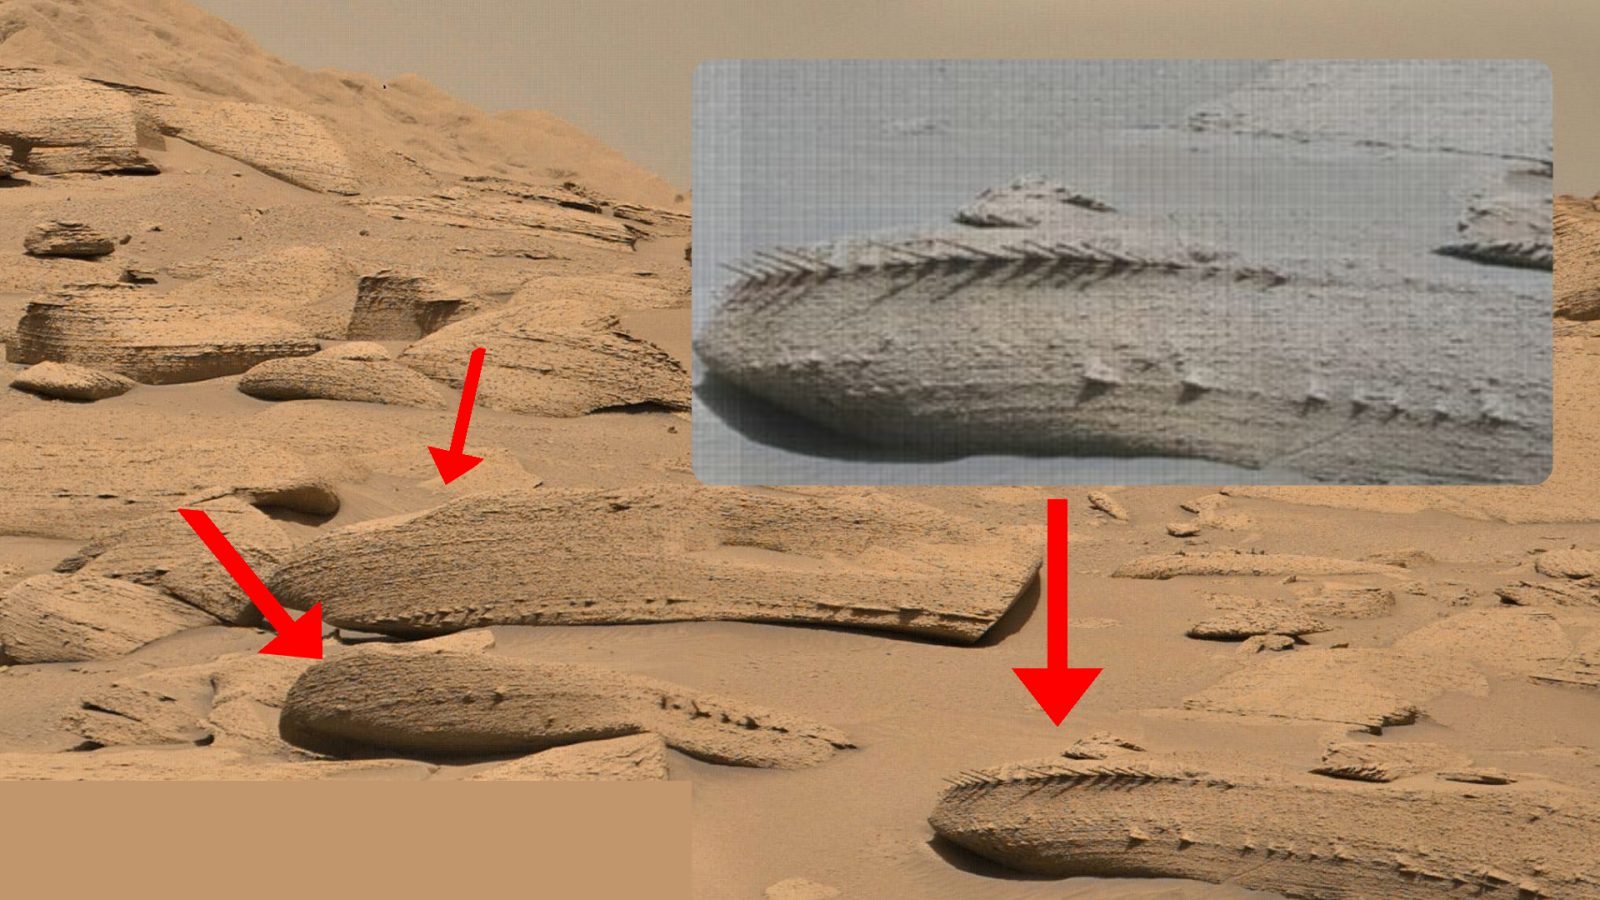 mars rover photos structures